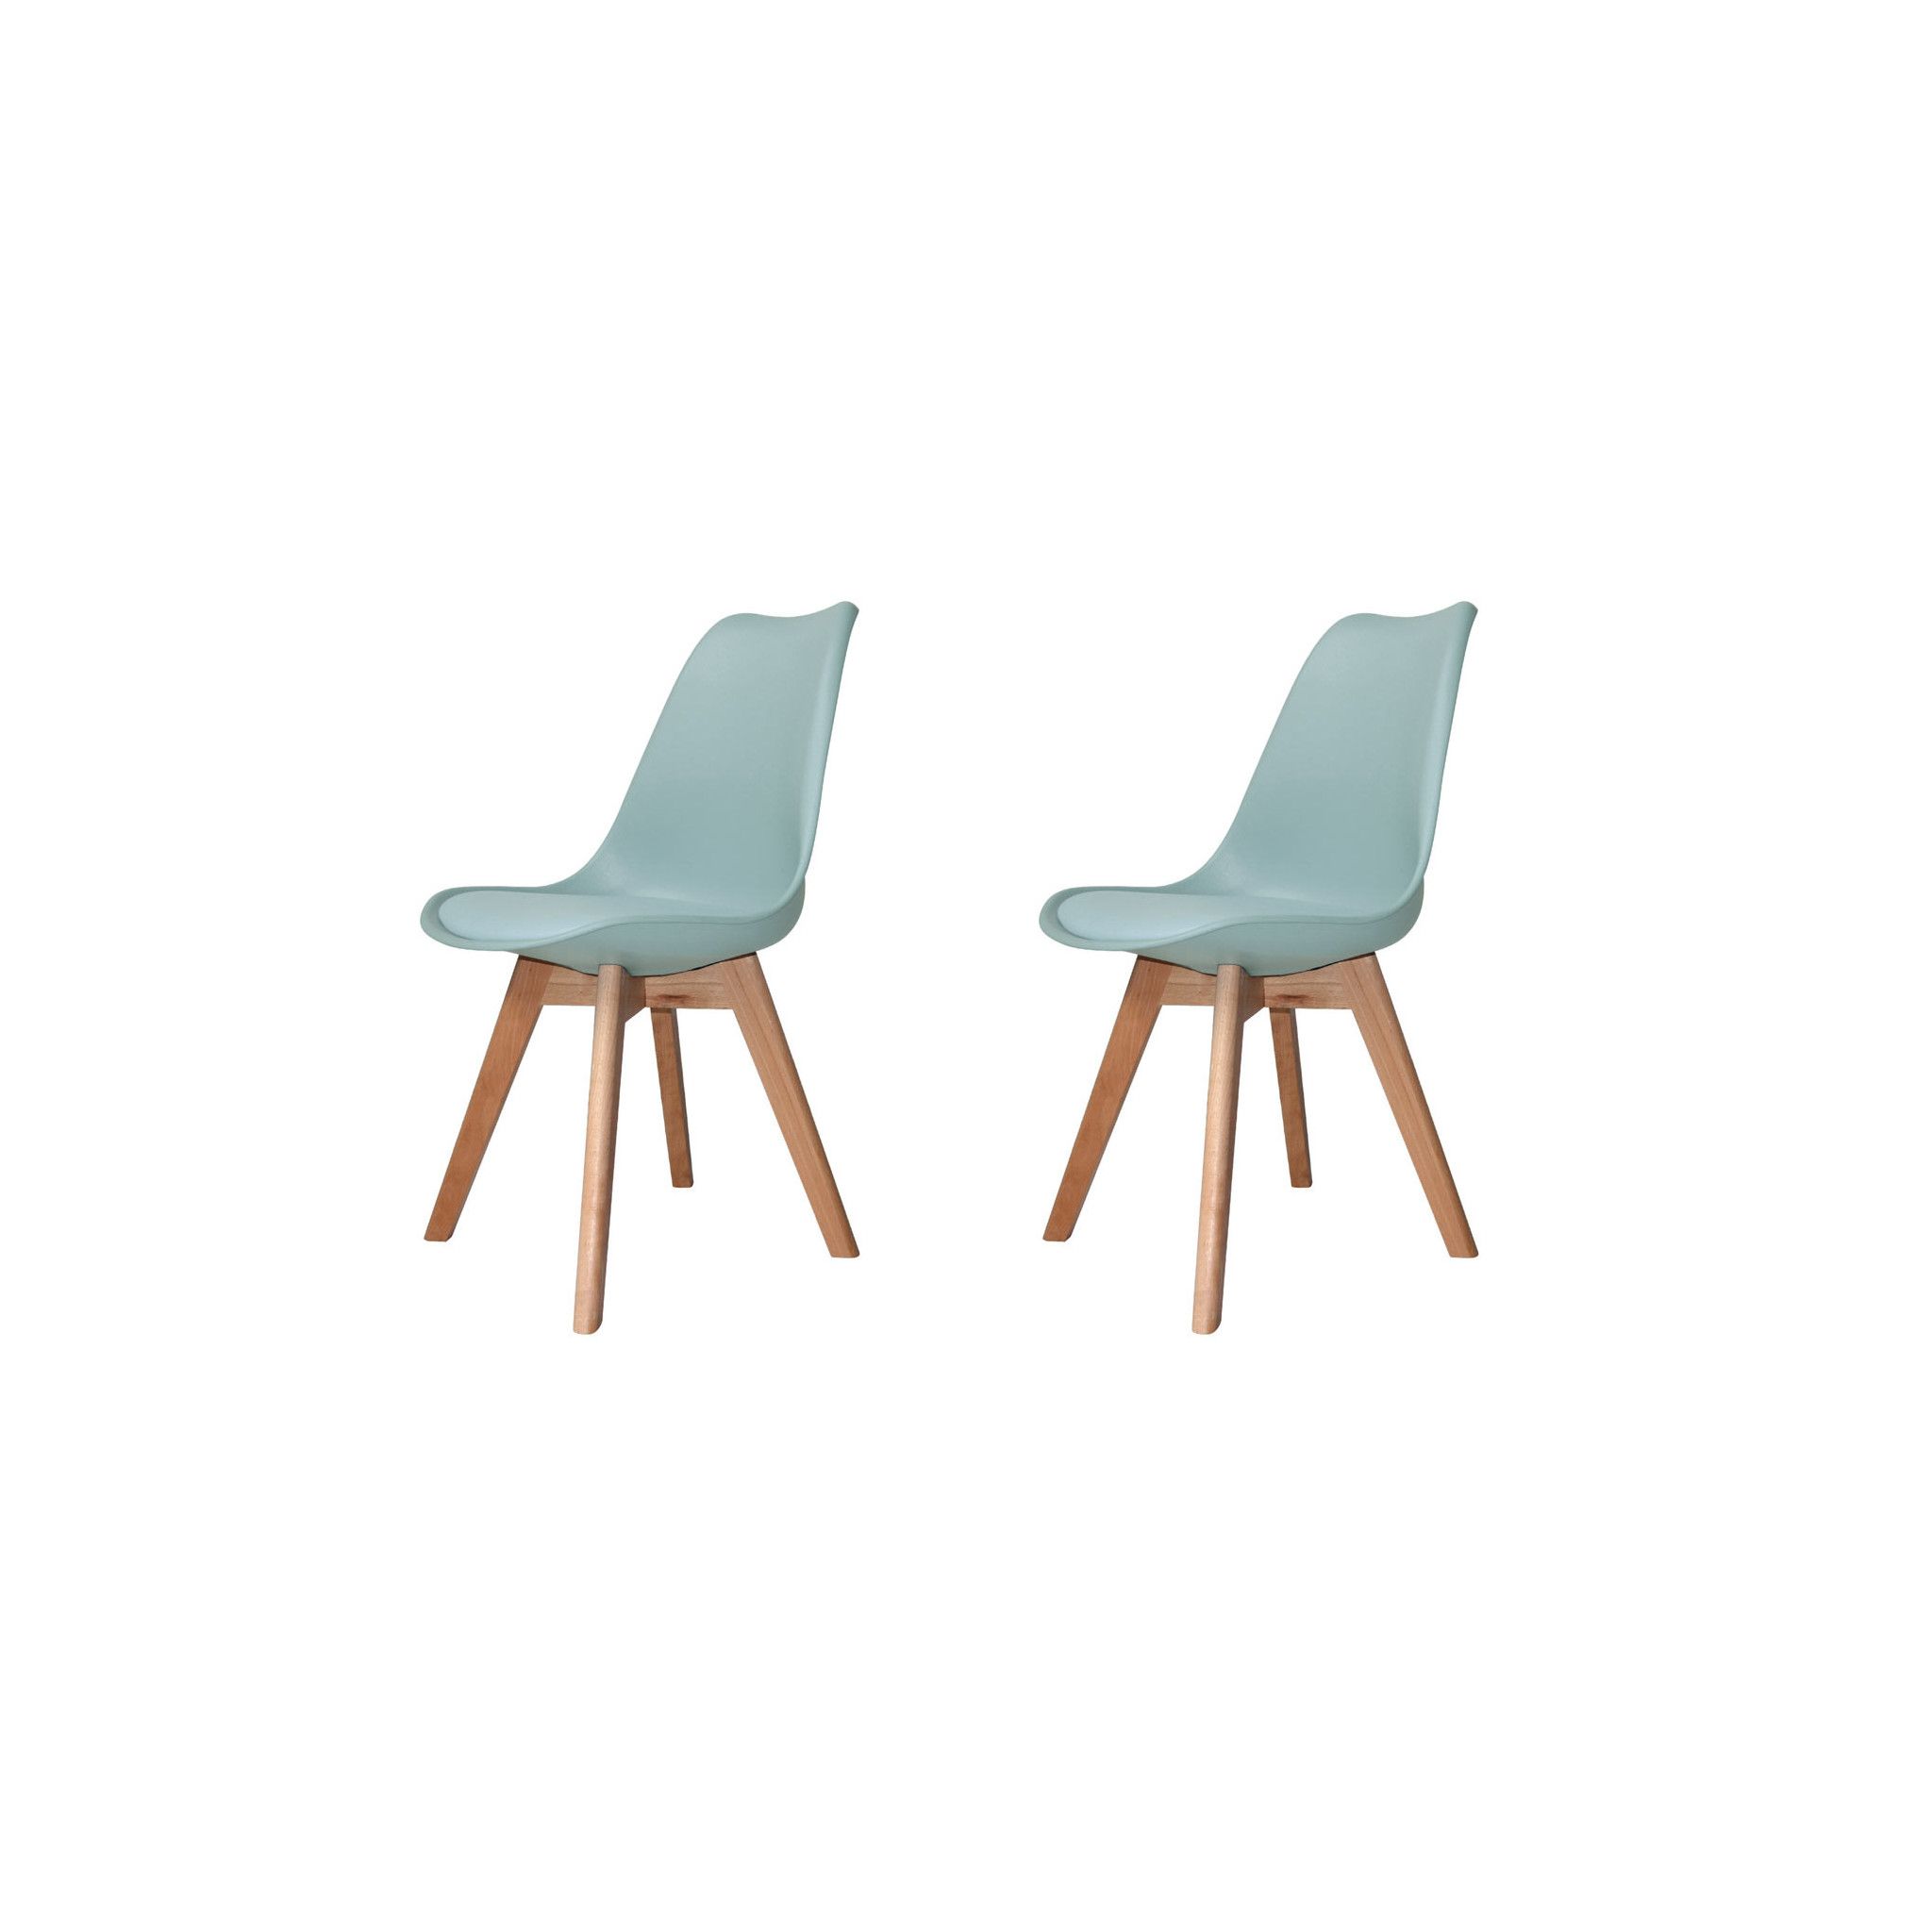 PACK 2 CHAISES NEW TOWER WOOD VERT D'EAU EXTRA QUALITY